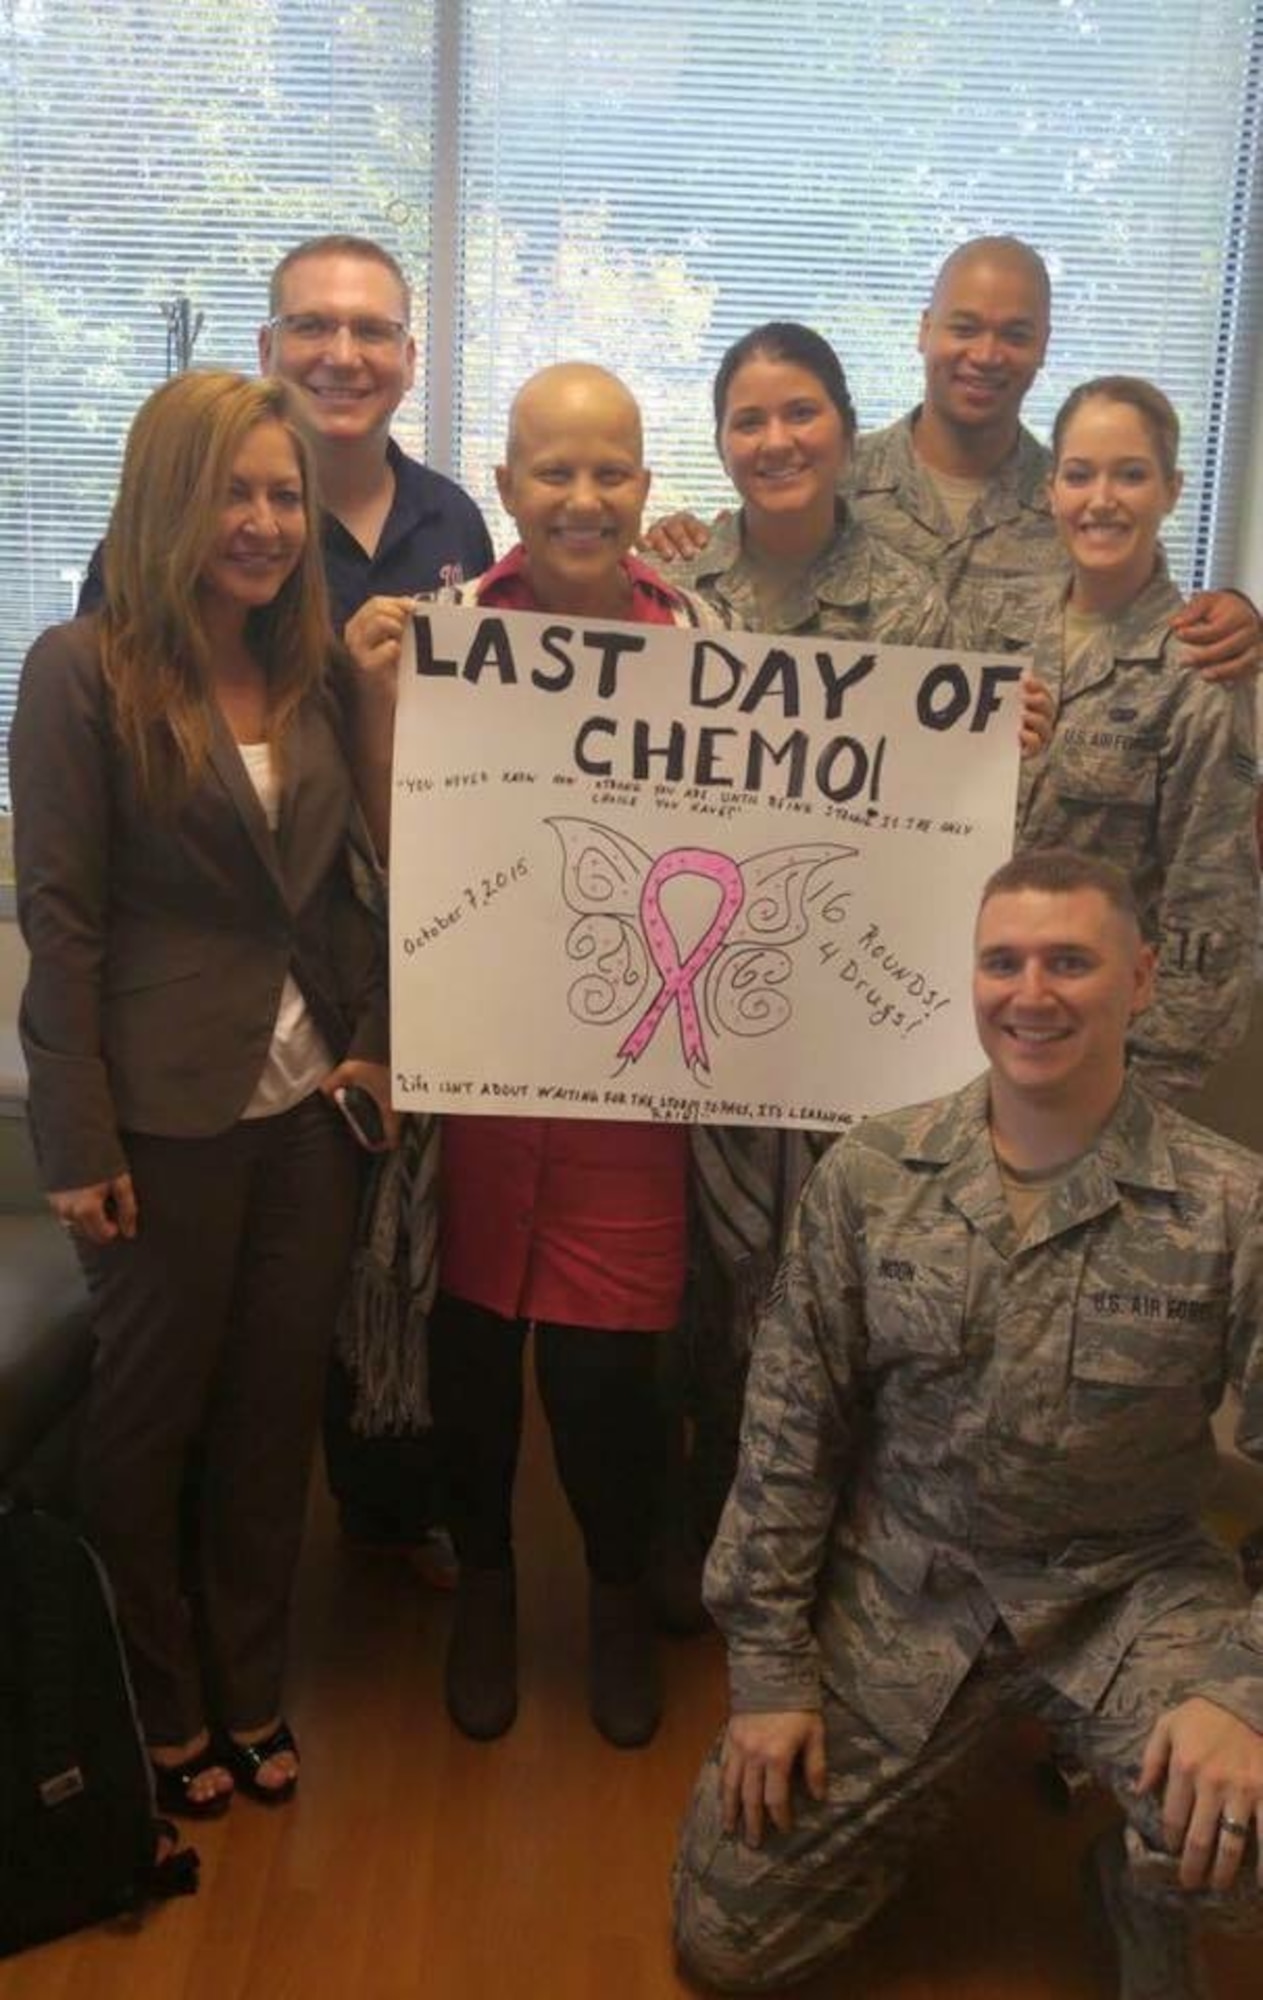 Tech. Sgt. Moira Howerton, 113th Communications Flight, D.C. Air National Guard, poses with co-workers on her last day of chemotherapy to treat stage 2, triple negative breast cancer. Howerton underwent 16 rounds of aggressive chemotherapy. (Photo courtesy of Tech. Sgt. Howerton)